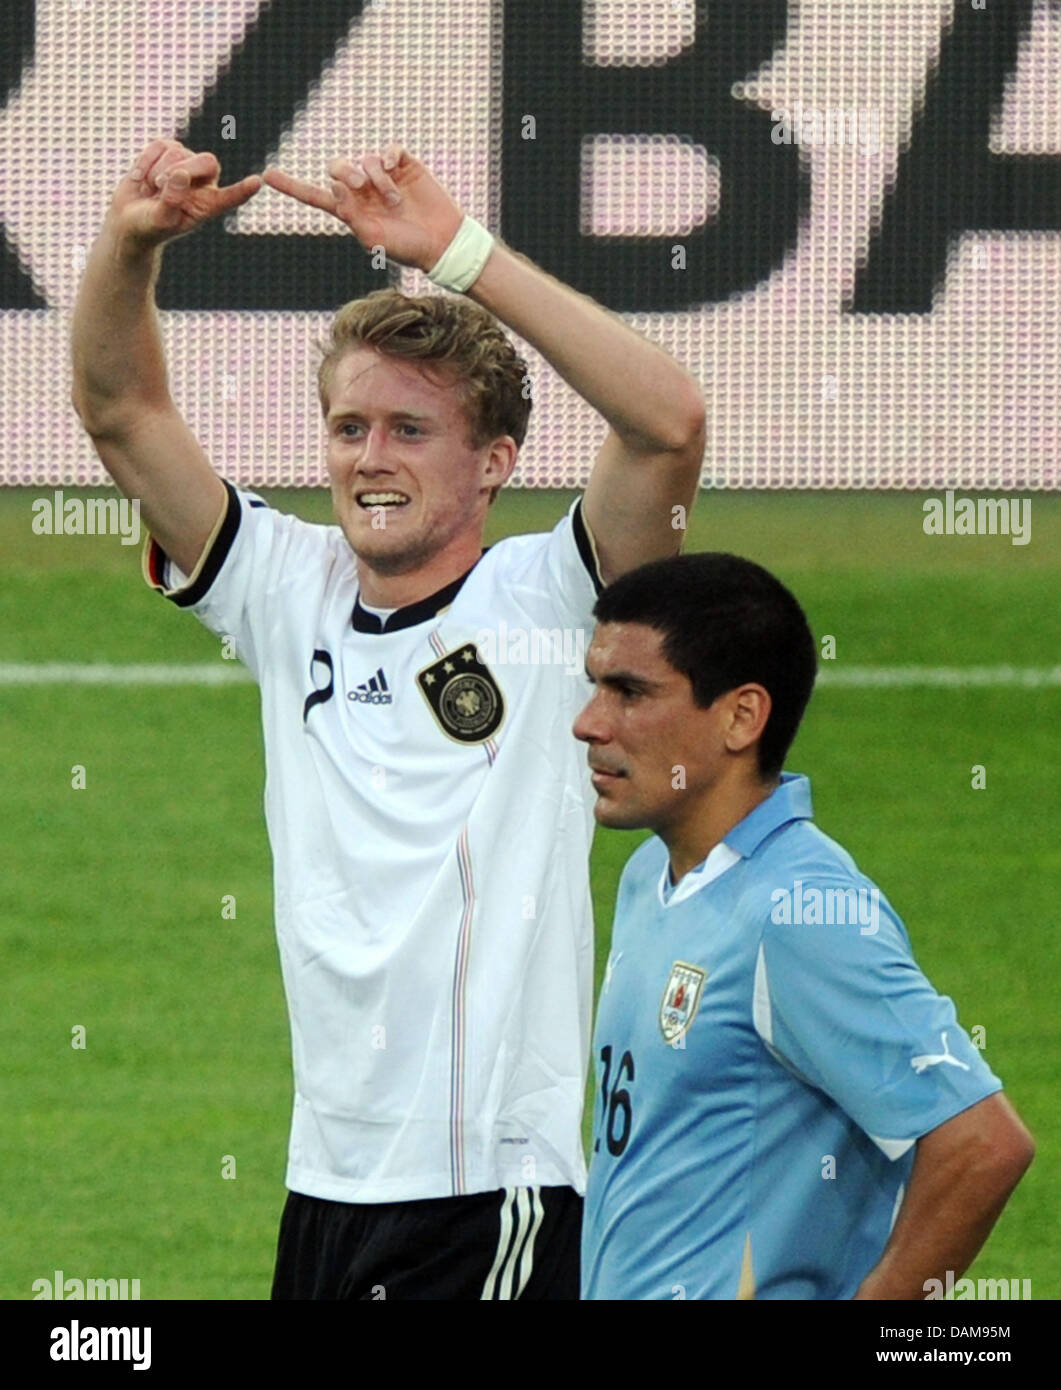 Germany's Andre Schuerrle celebrates after scoring the 2-0 next to Maxi Pereira of Uruguay during the soccer friendly Germany vs. Uruguay at Rhein-Neckar-Arena in Sinsheim, Germany, 29 May 2011. Germany won the friendly match 2-1. Photo: Uli Deck Stock Photo